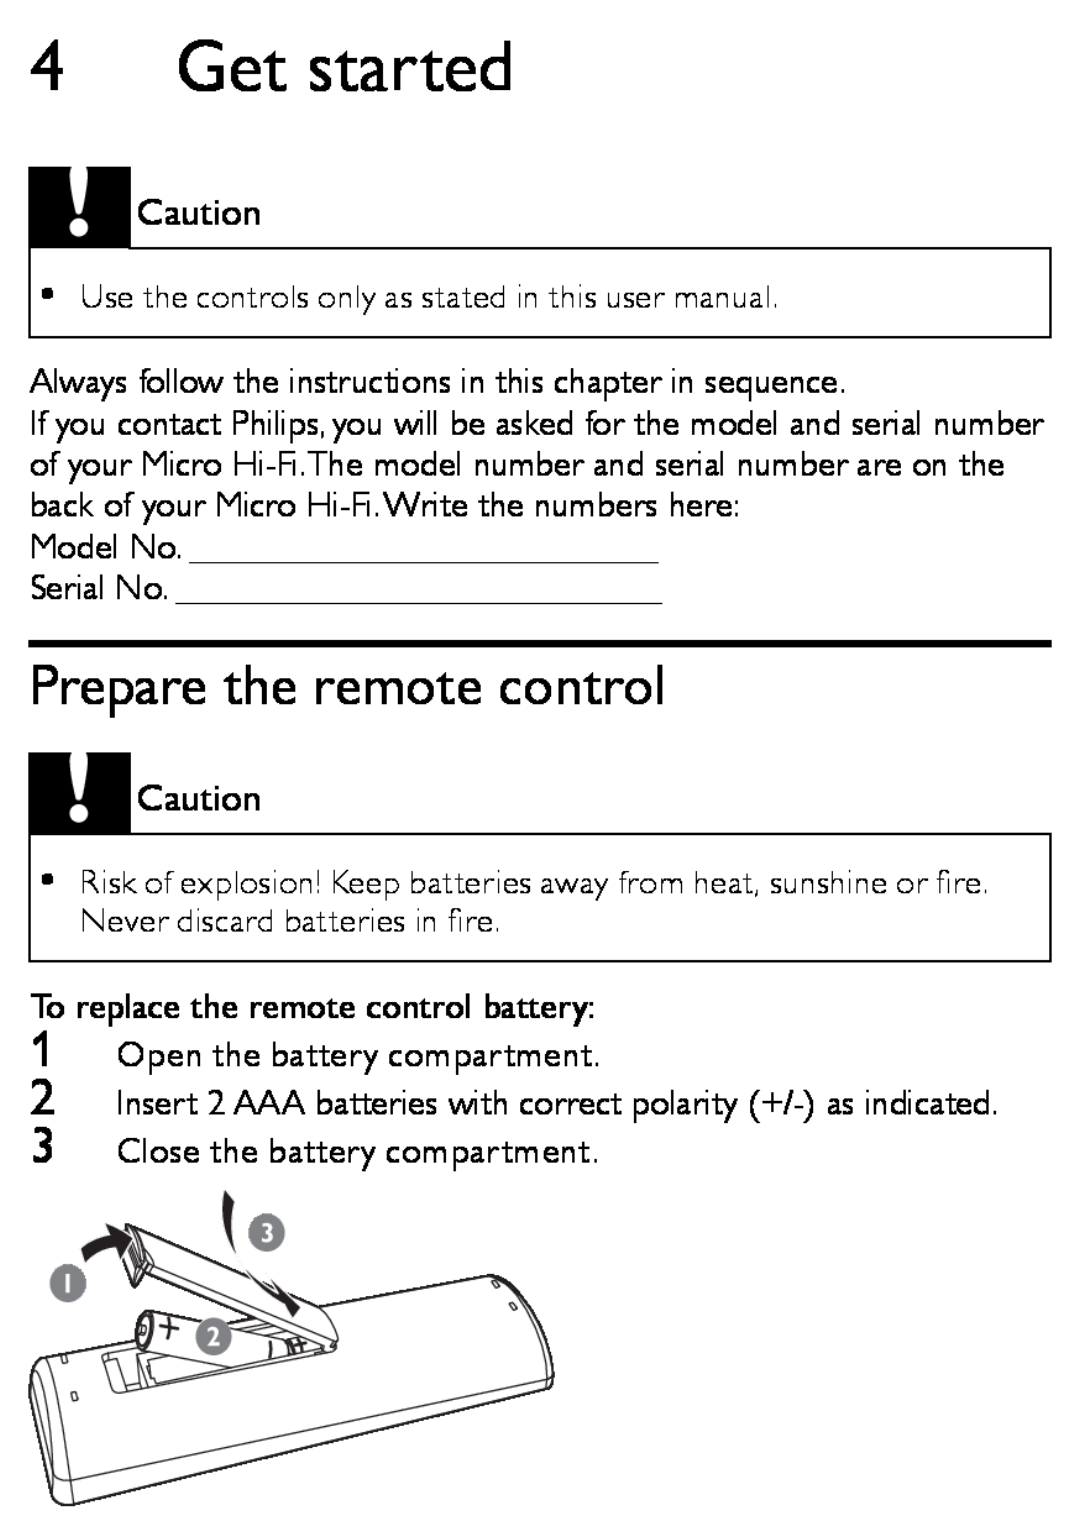 Philips MCM166 user manual Get started, Prepare the remote control 